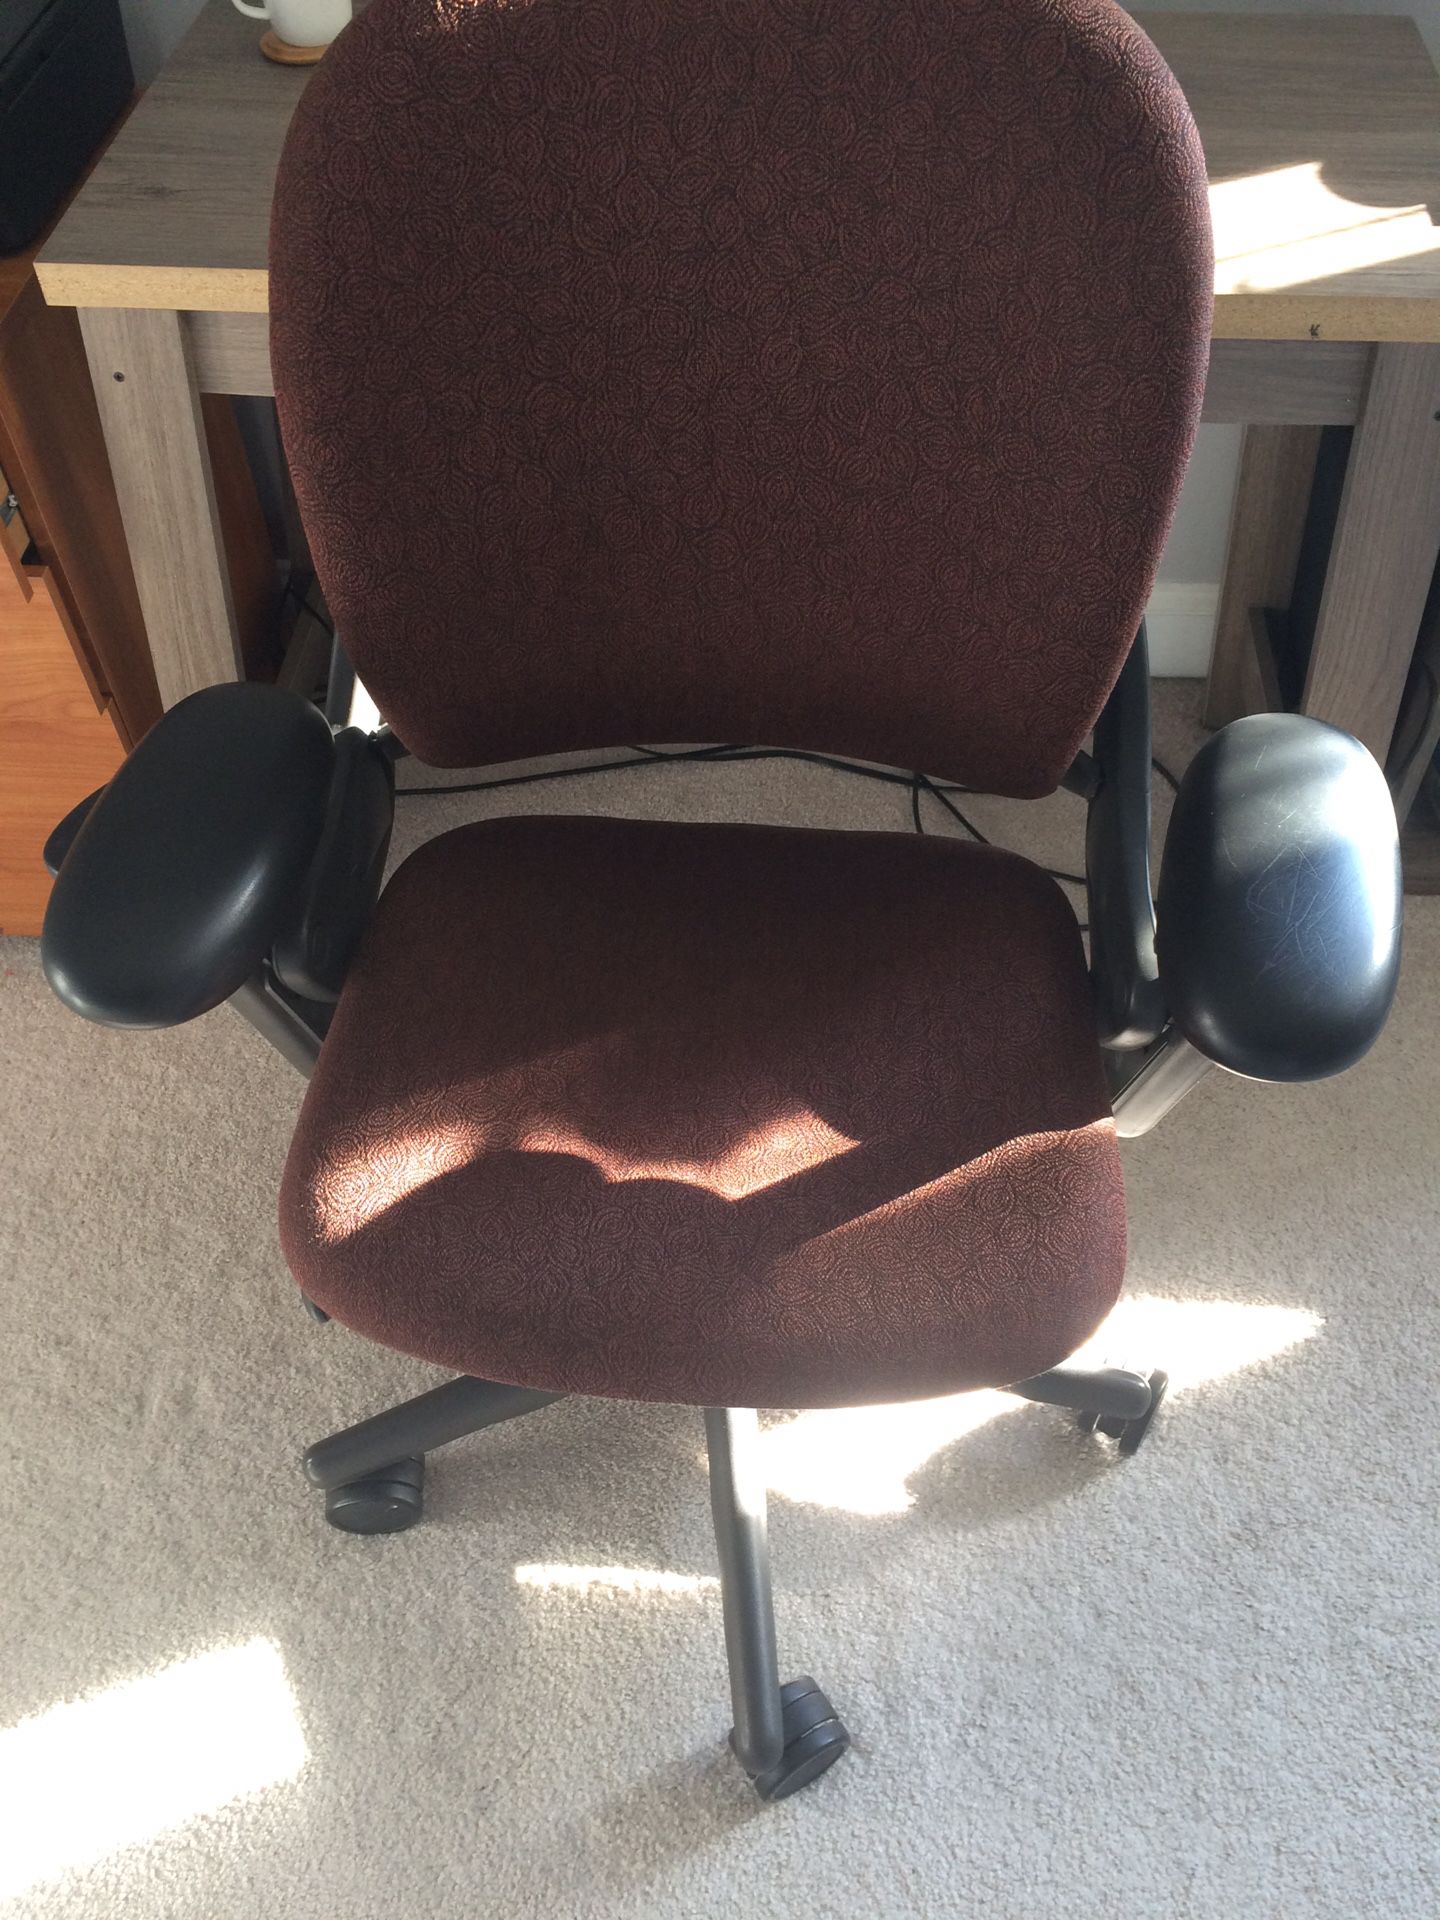 Desk and office chair